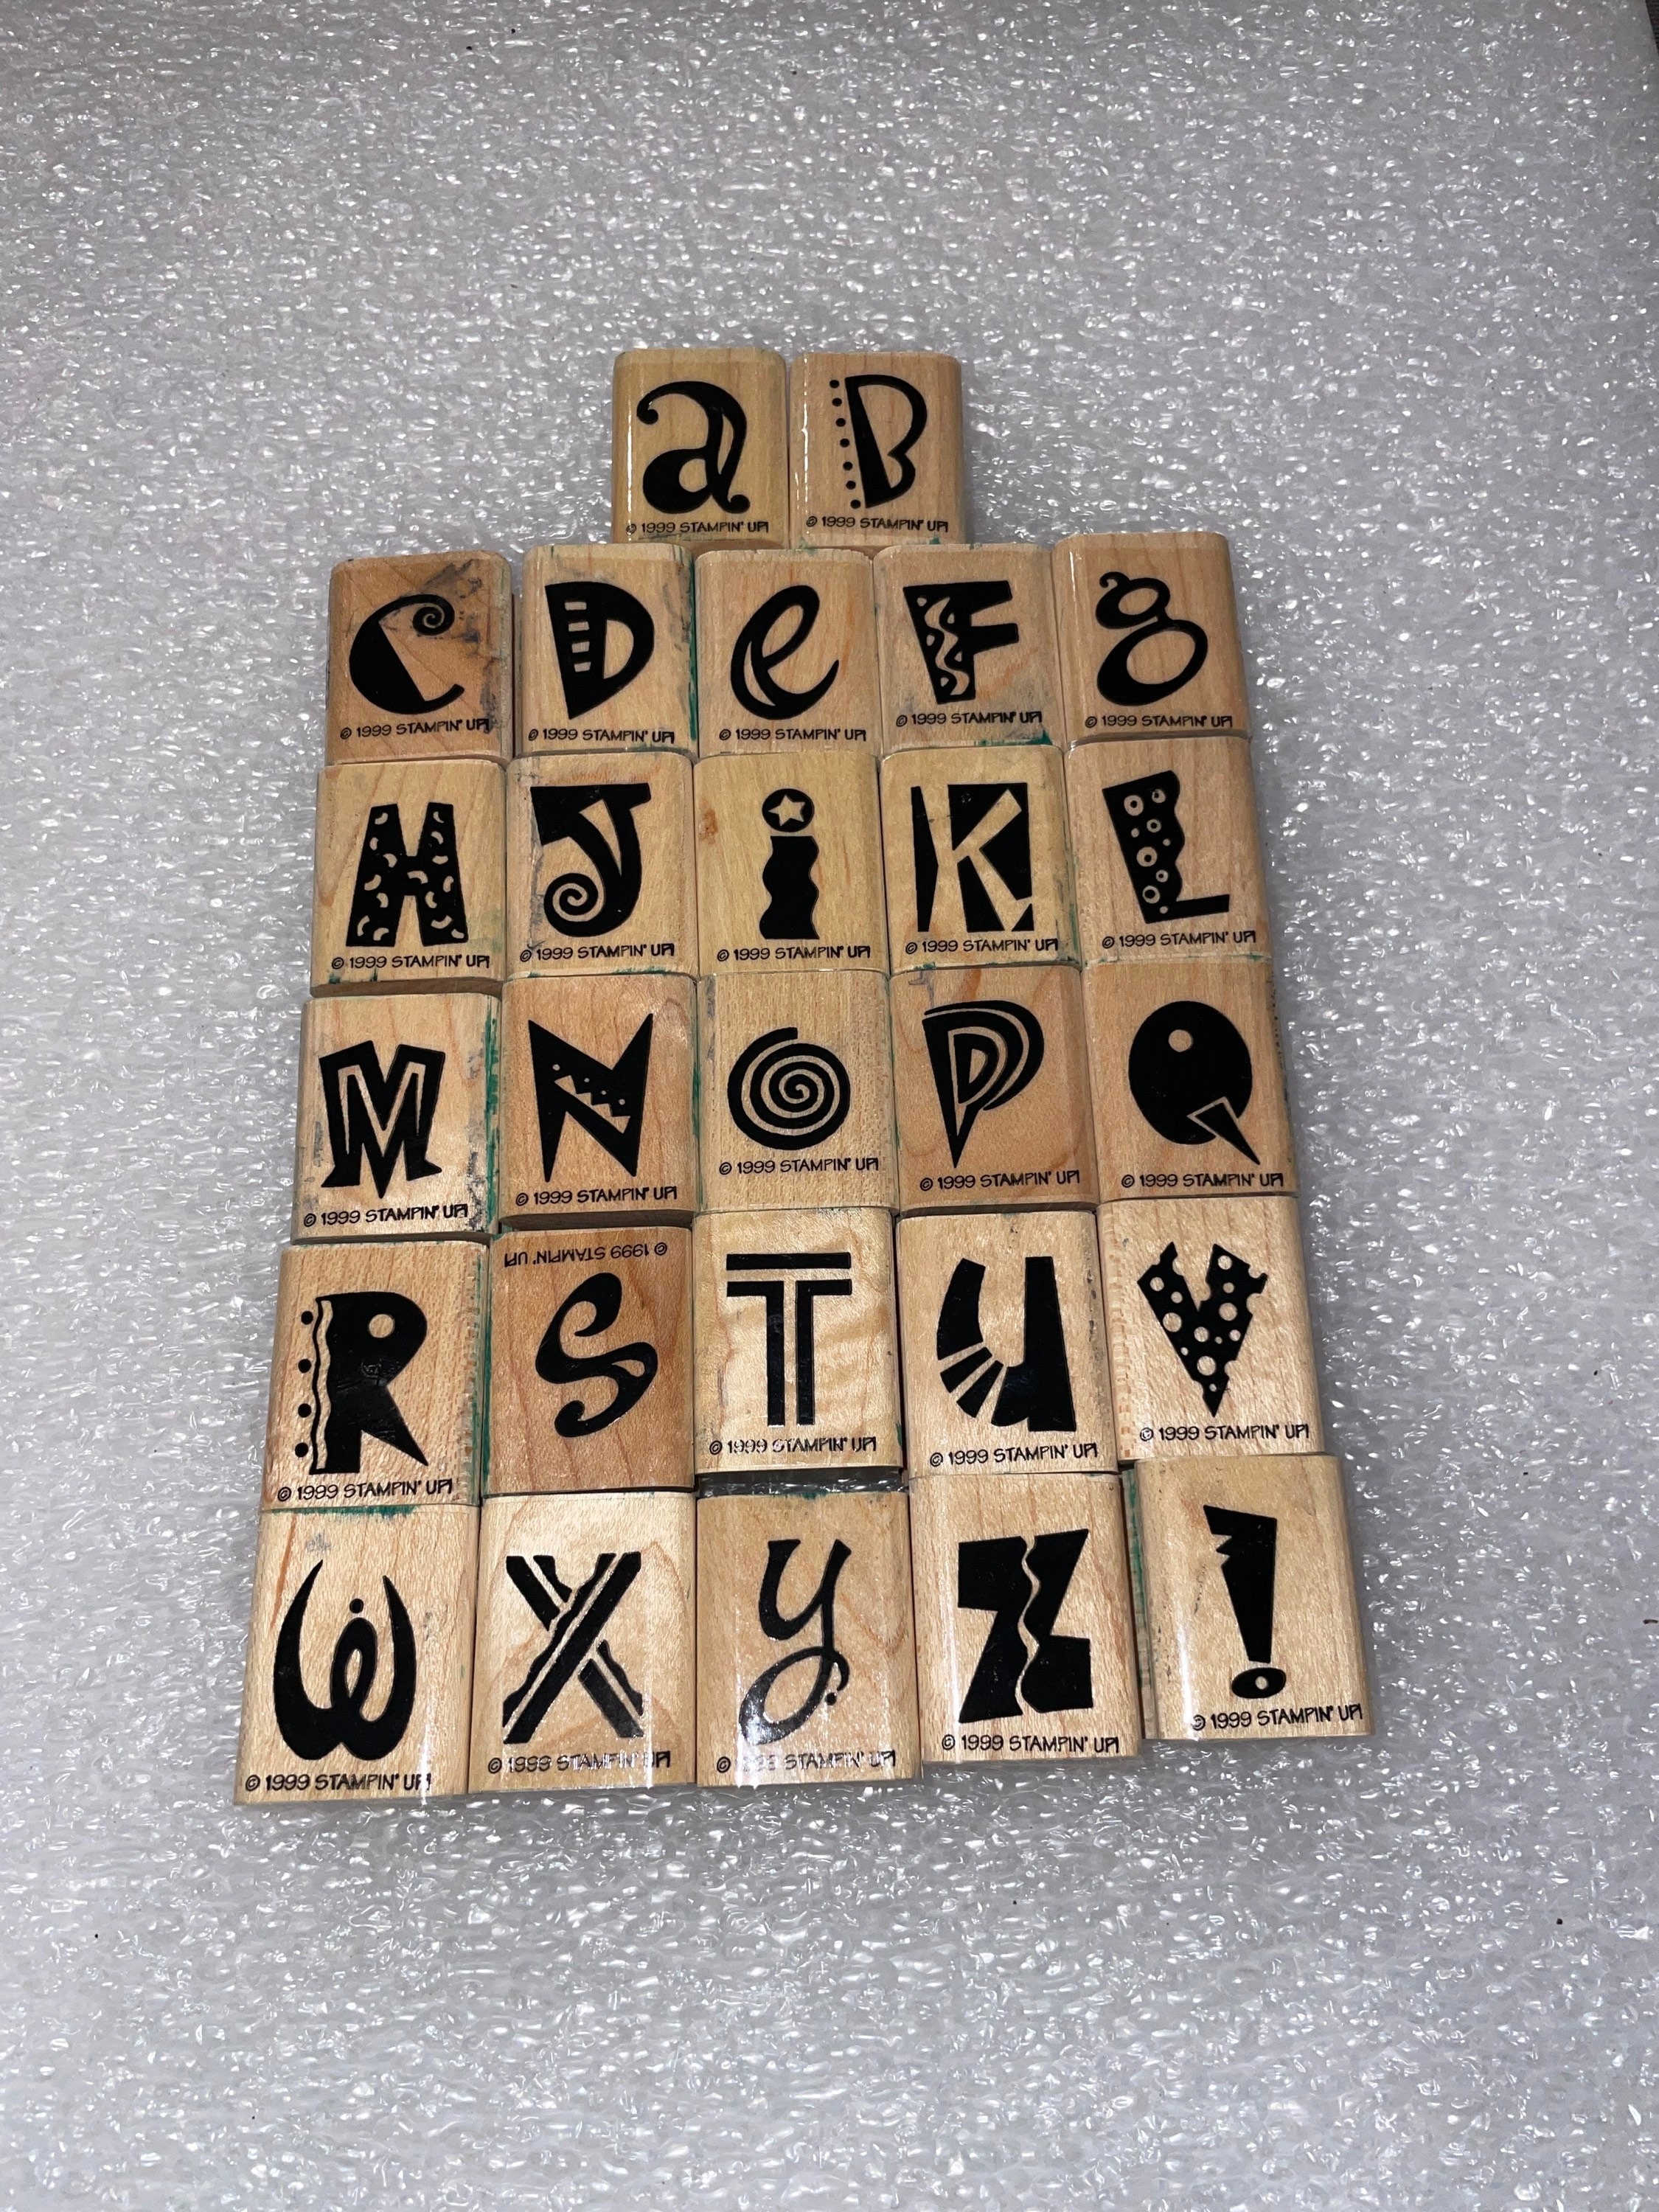 Handwriting Alphabet Stamp Set Letter Stamps in Box Wooden Letter Stamps  Scrapbook Supplies Journal Supplies Card Making Supplies 